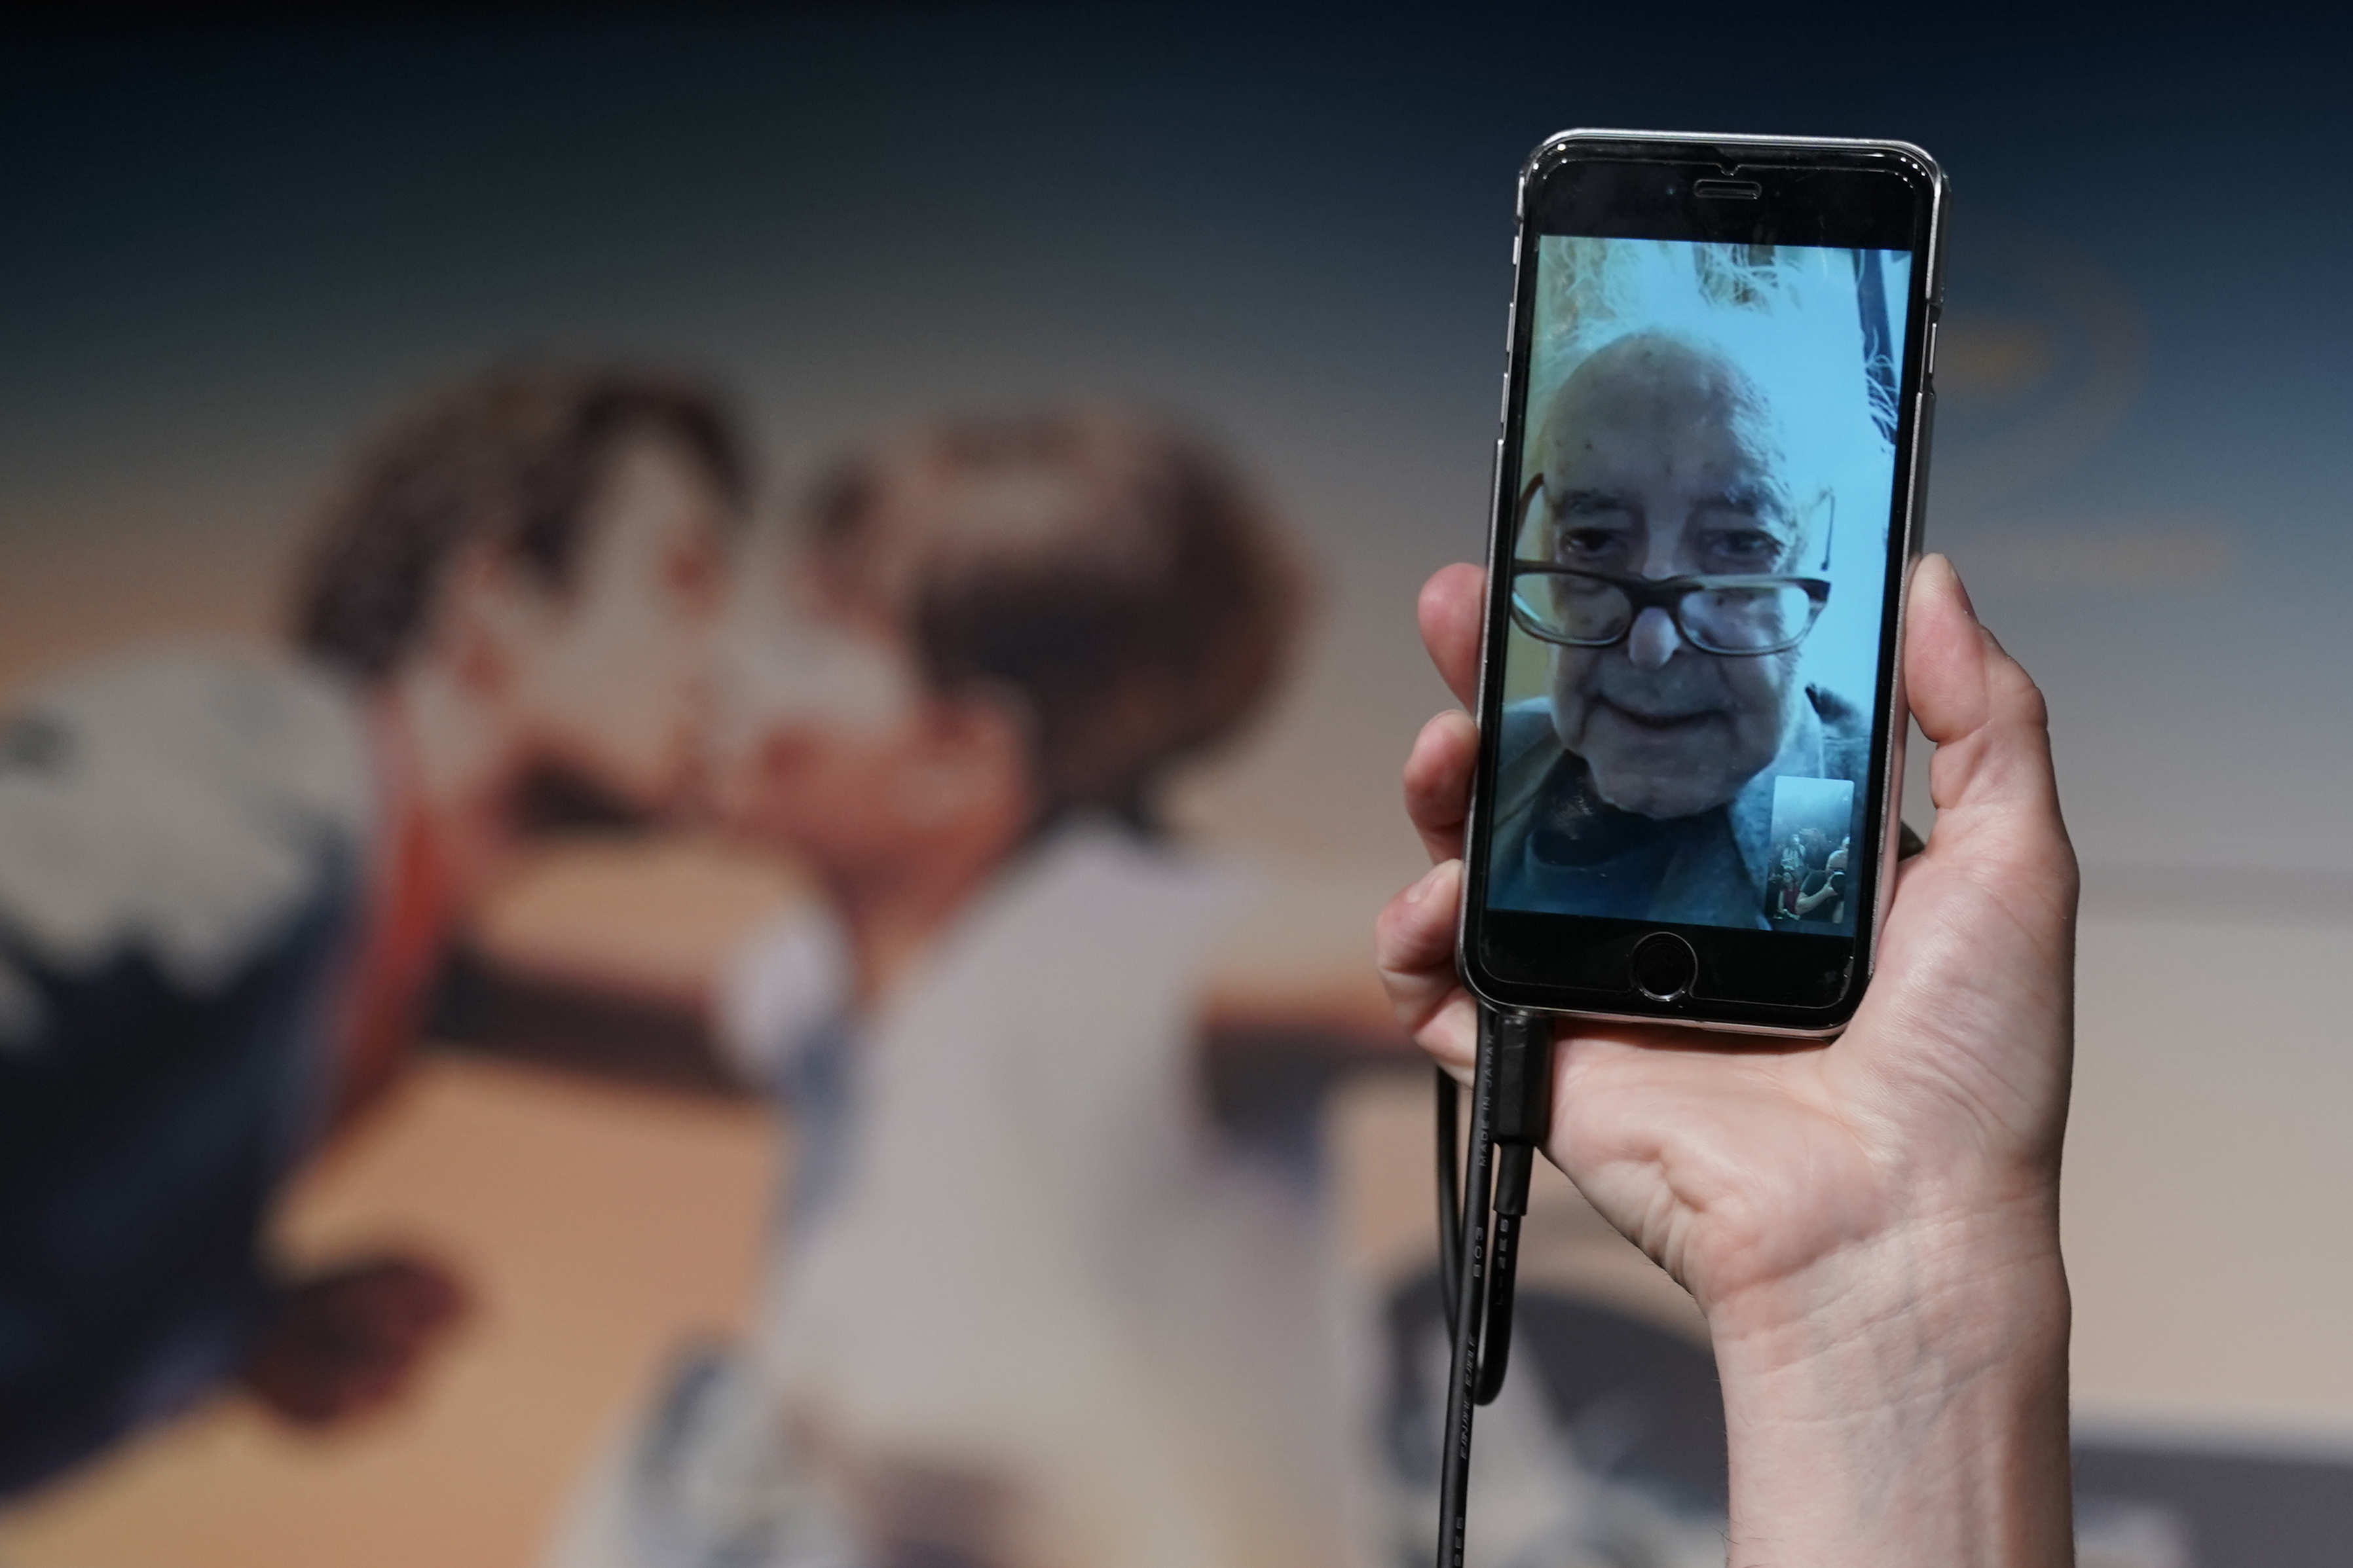 Director Jean-Luc Godard addresses a press conference through a mobile phone video link, from his home in Switzerland, on May 12, 2018 at the 71st Cannes Film Festival in southern France.